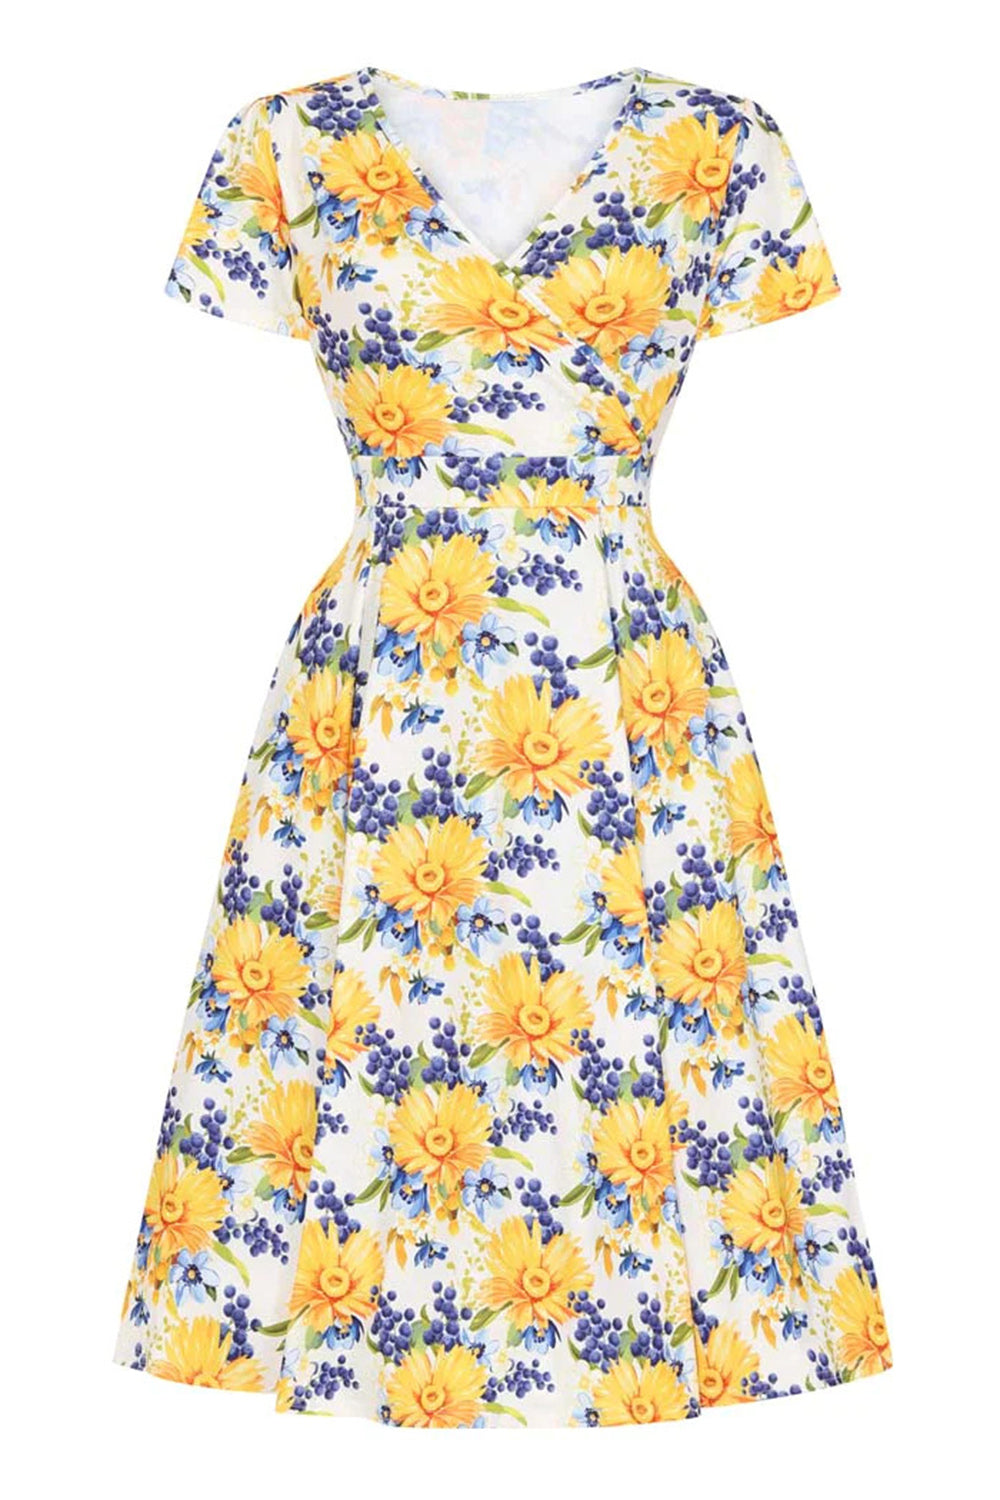 V-Neck Printed Yellow Vintage Dress with Short Sleeves